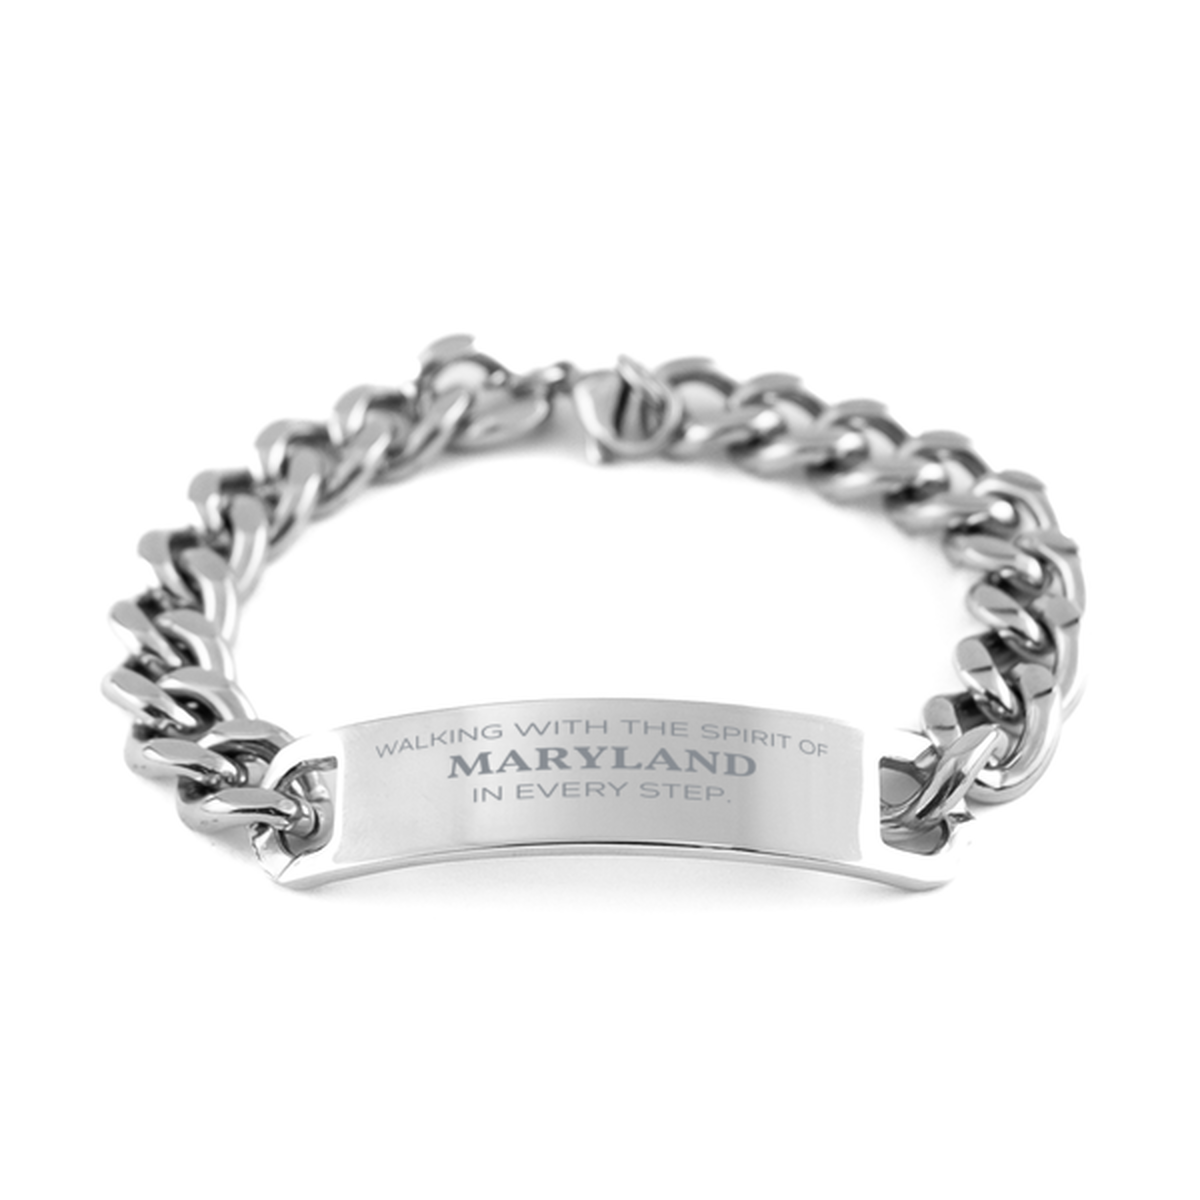 Maryland Gifts, Walking with the spirit, Love Maryland Birthday Christmas Cuban Chain Stainless Steel Bracelet For Maryland People, Men, Women, Friends